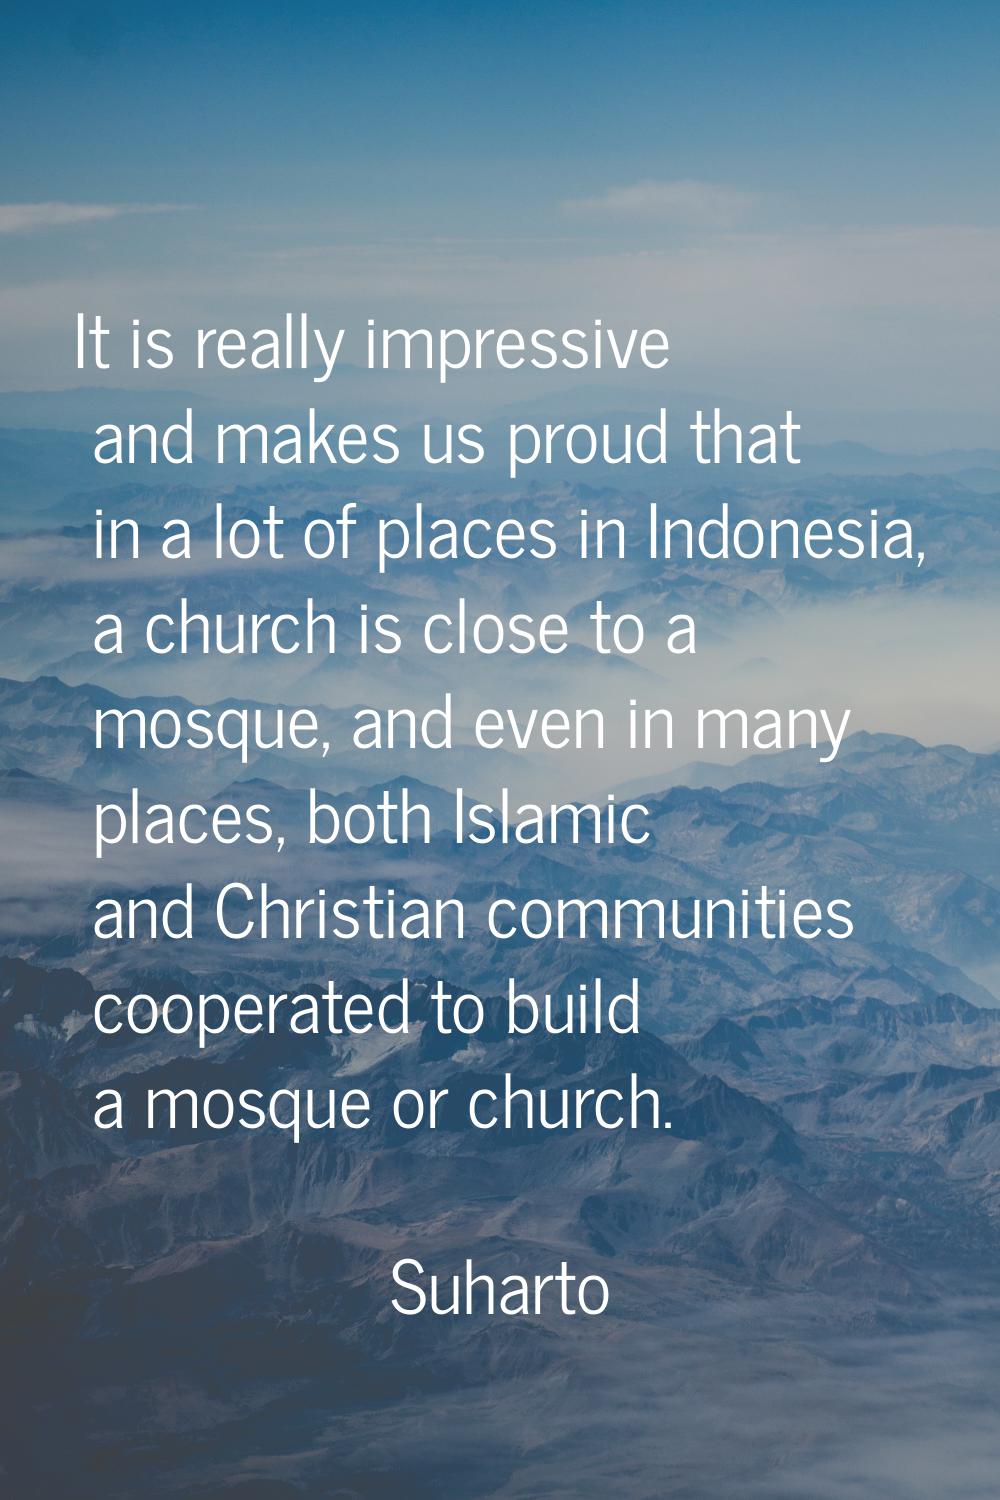 It is really impressive and makes us proud that in a lot of places in Indonesia, a church is close 